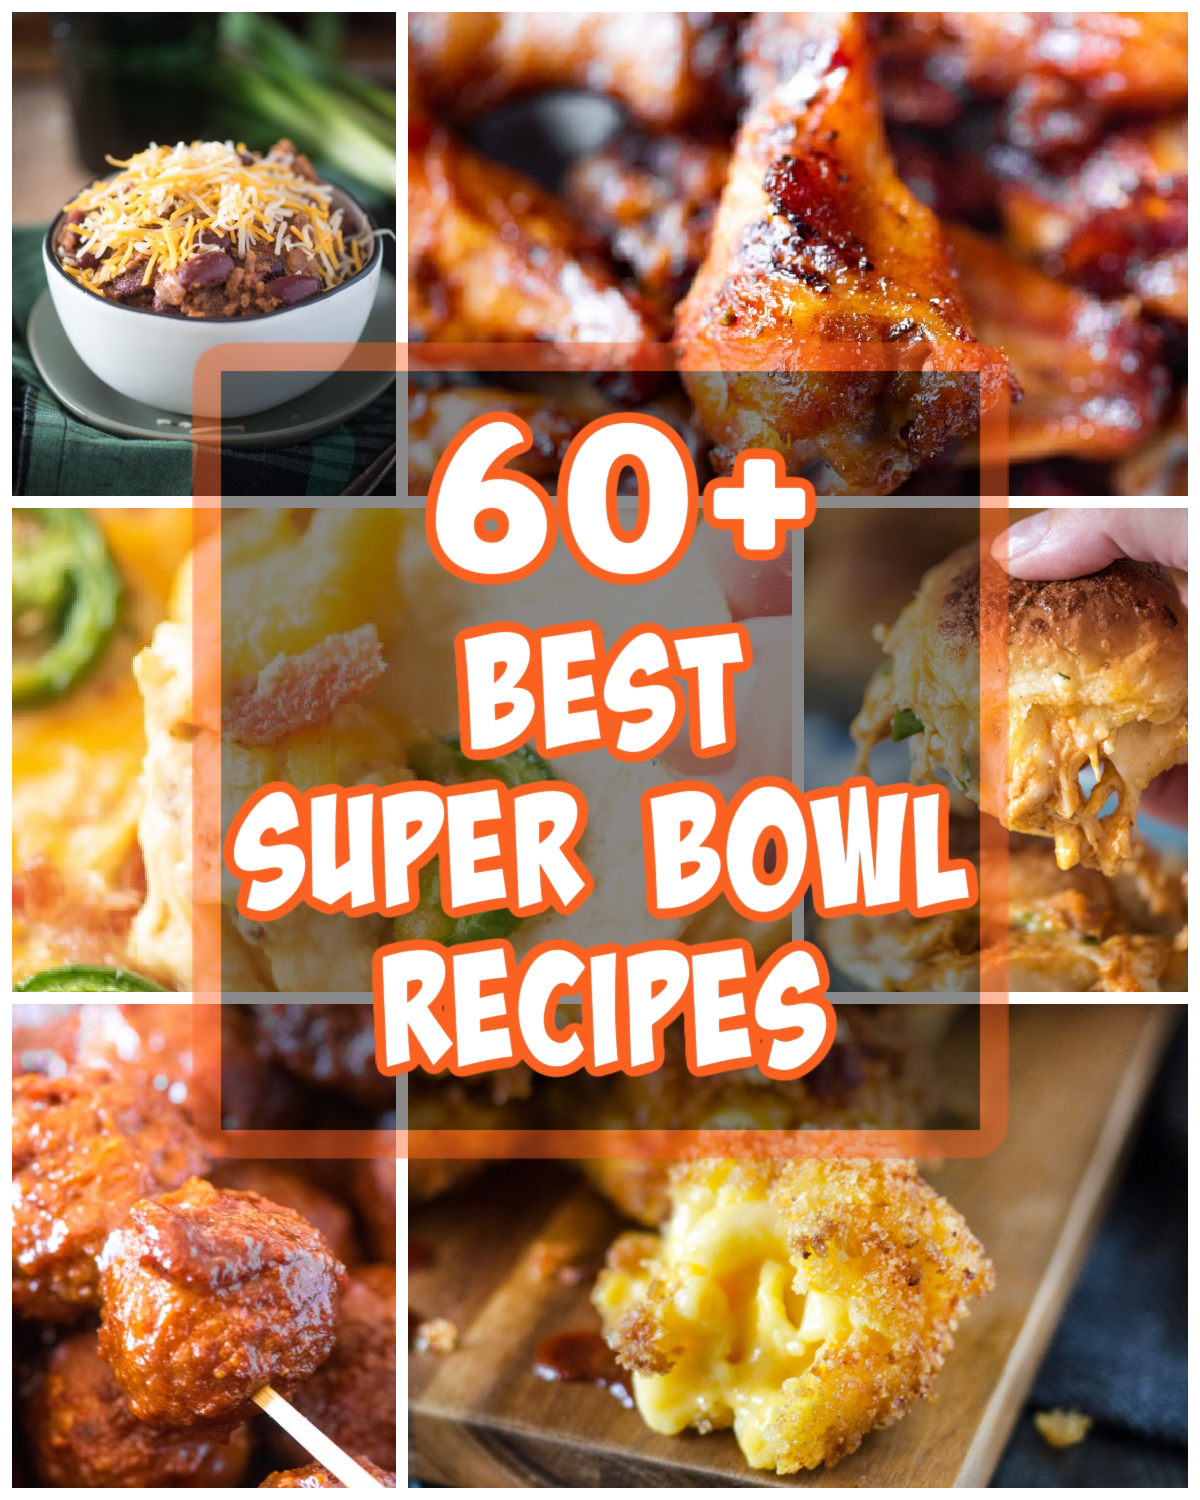 These easy Super Bowl Party Food ideas will be a total game changer! Tons of quick appetizers and dips to feed a crowd! #superbowl #superbowlparty #football #appetizer #gogogogourmet via @gogogogourmet